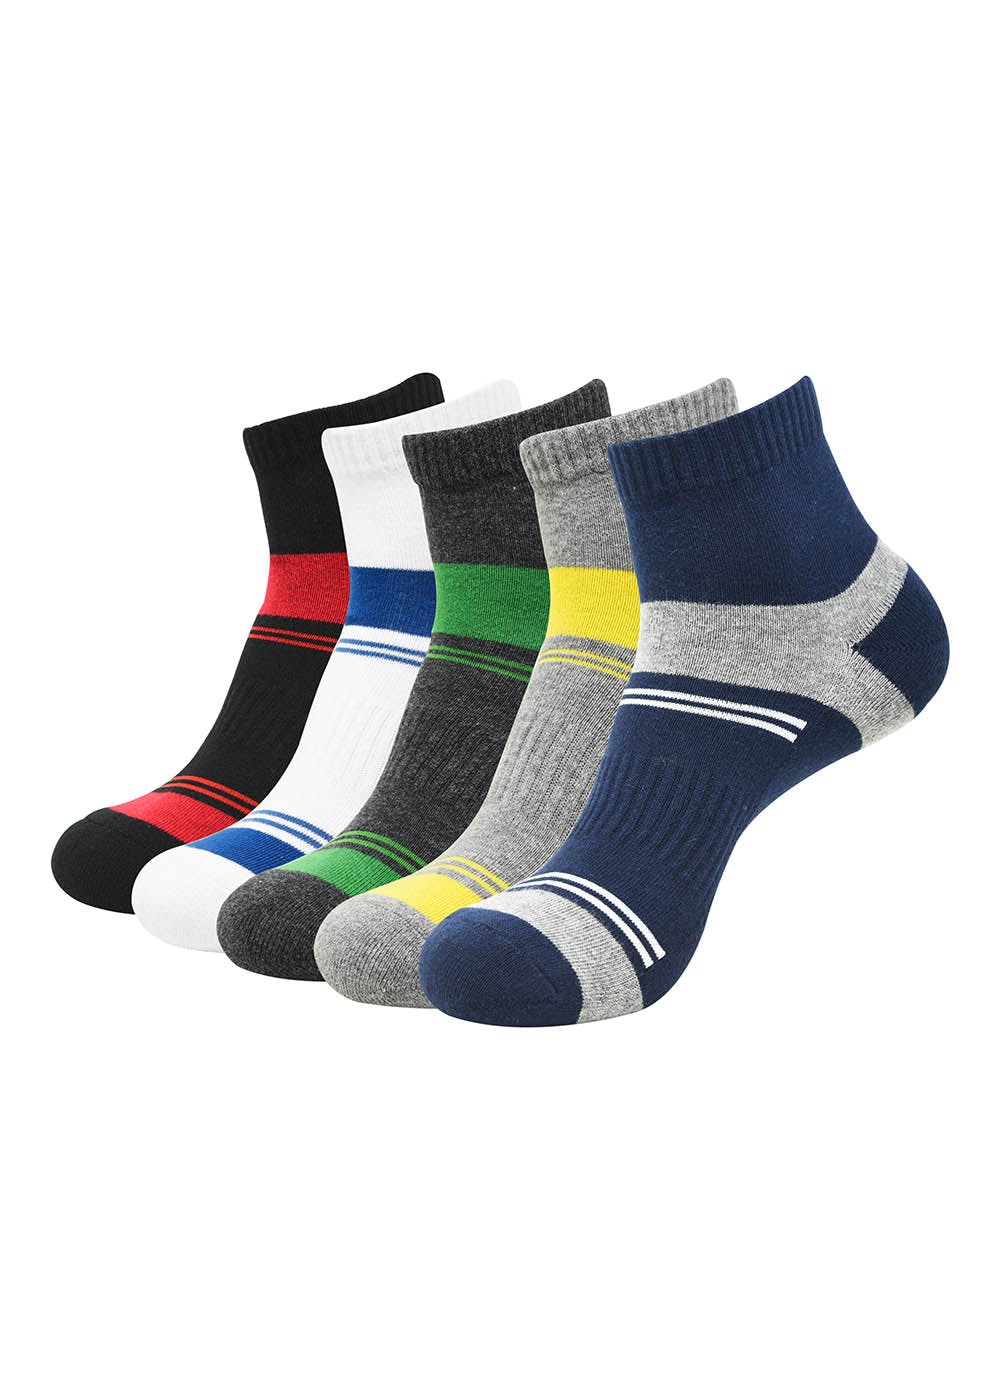 Get Set of 5 Cushioned High Ankle Socks at ₹ 525 | LBB Shop